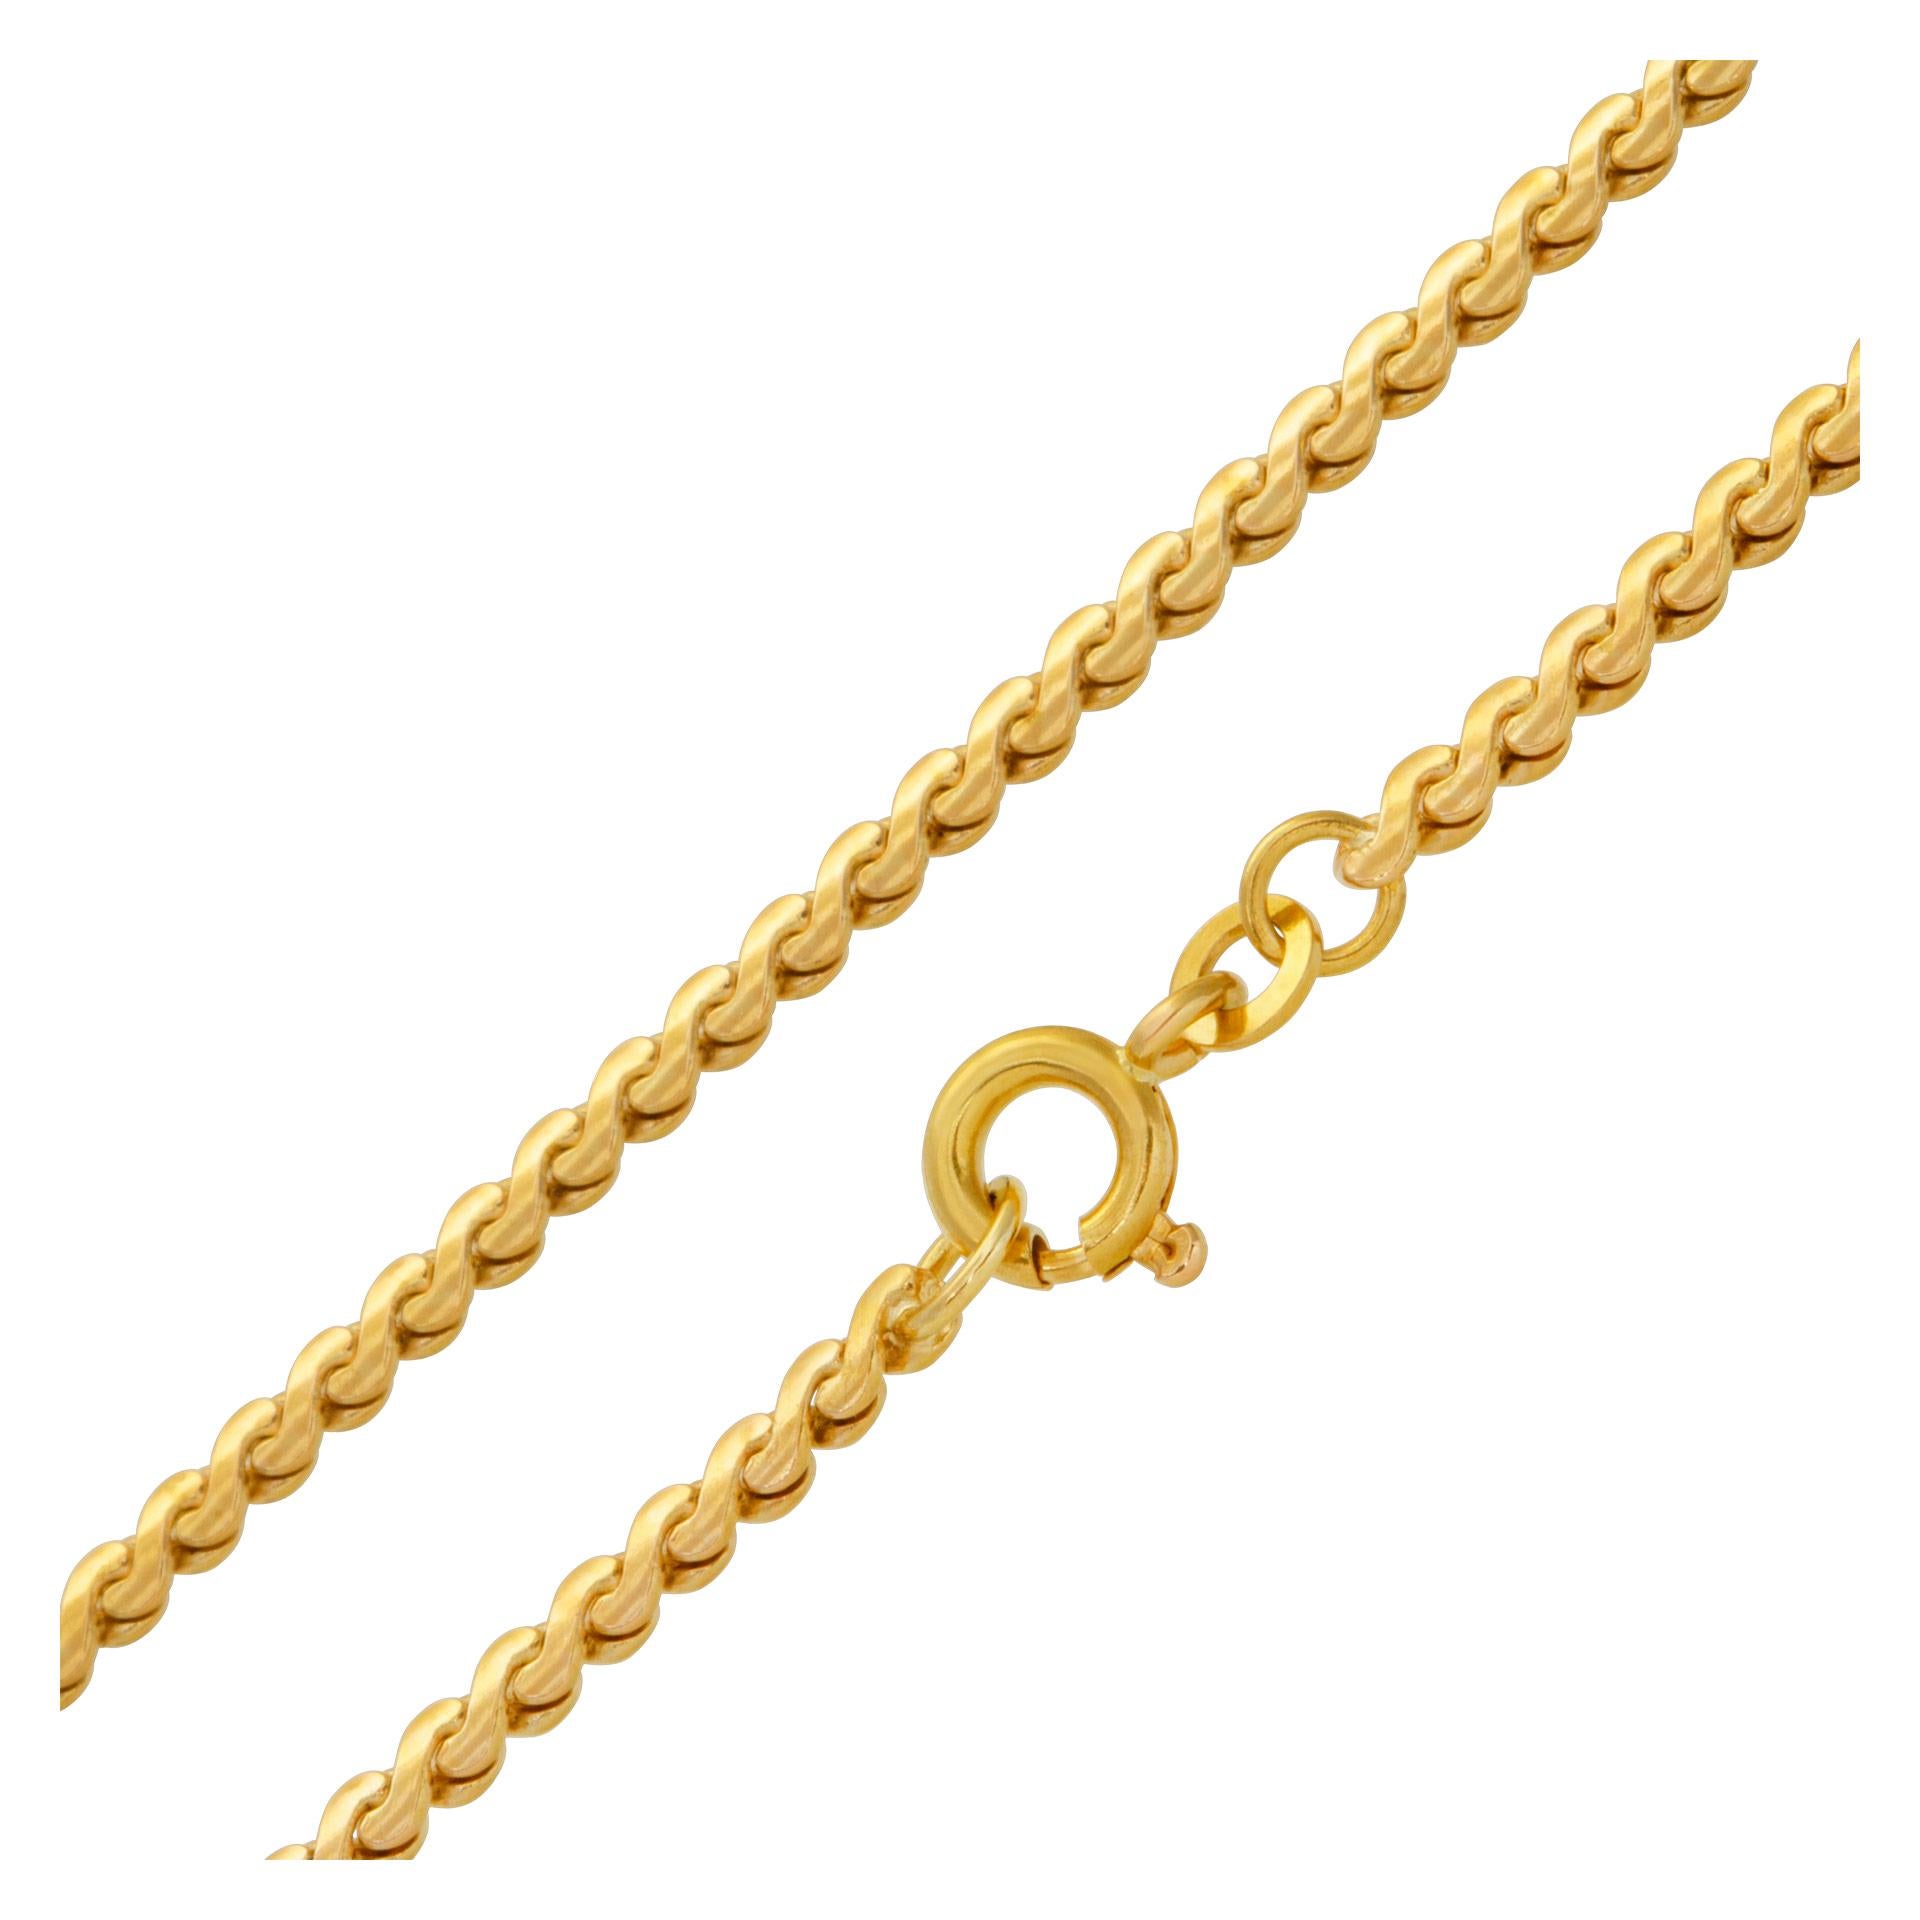 Women's or Men's Curb Link Neklace in 14k Yellow Gold, Necklace